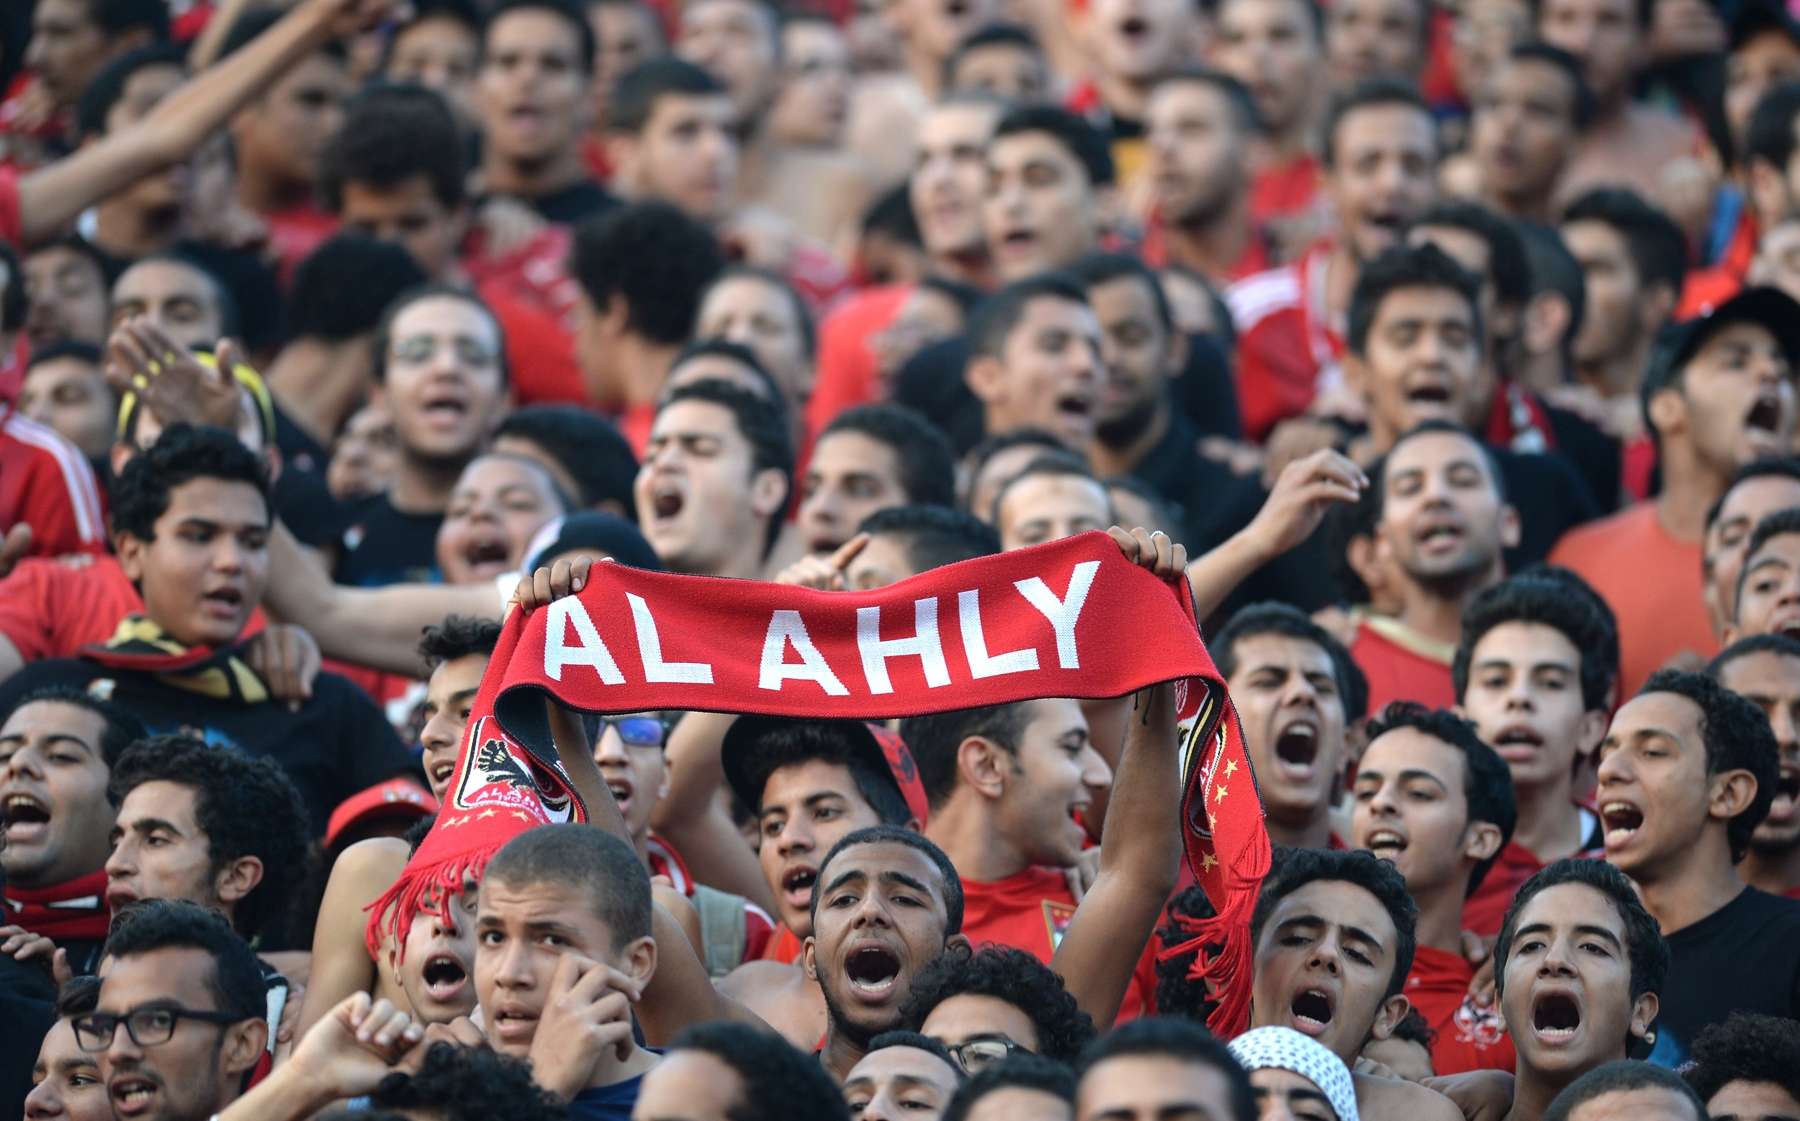 Fans at Orlando Pirates VS Al-Ahly African Champions